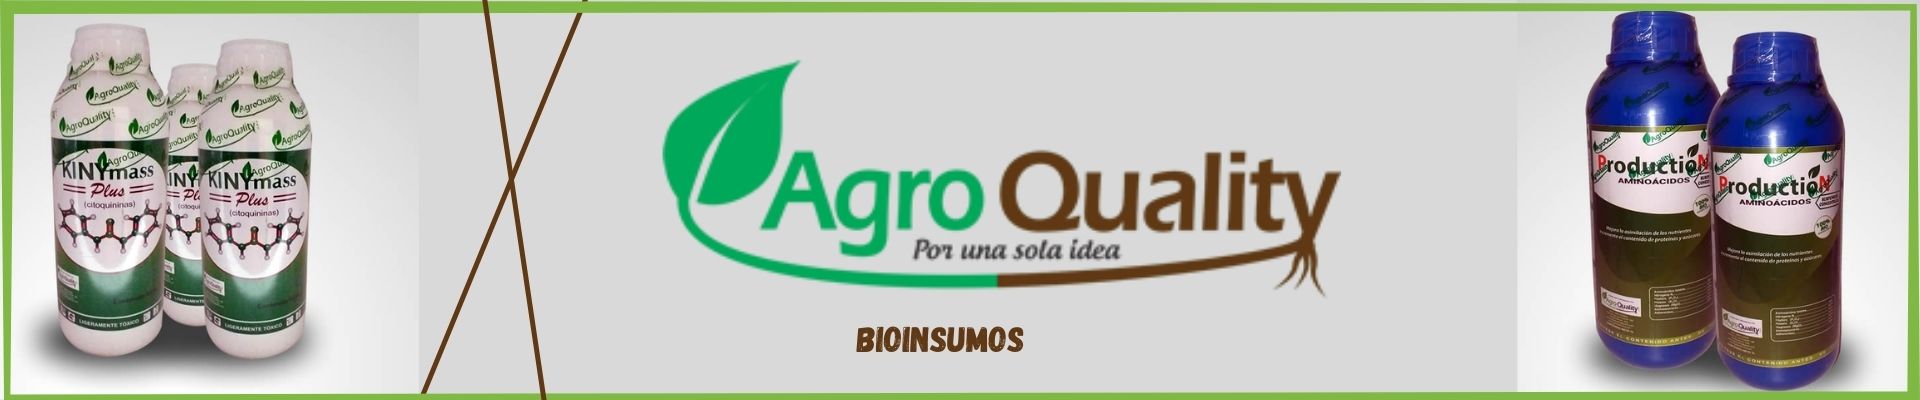 Banner Agroquality